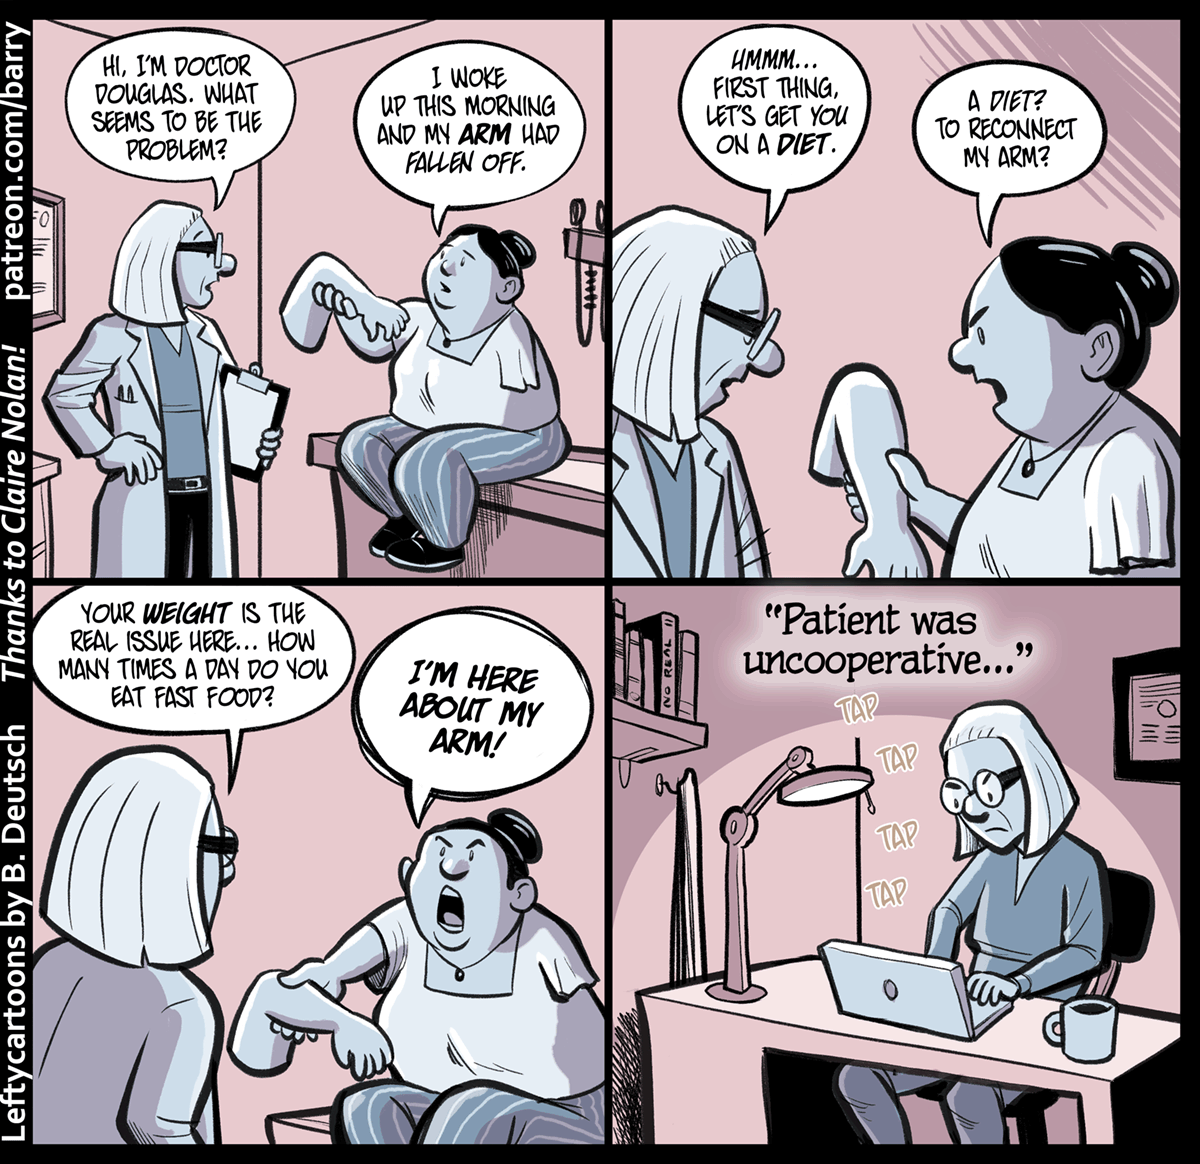 A thread of Fat Acceptance cartoons! Doctors and Fat PatientsTranscript:  https://www.patreon.com/posts/doctors-and-fat-22257157Like the cartoons? Support them by retweeting, or by pledging a buck or two at  http://patreon.com/barry .  #FatAcceptance  #PoliCartoon